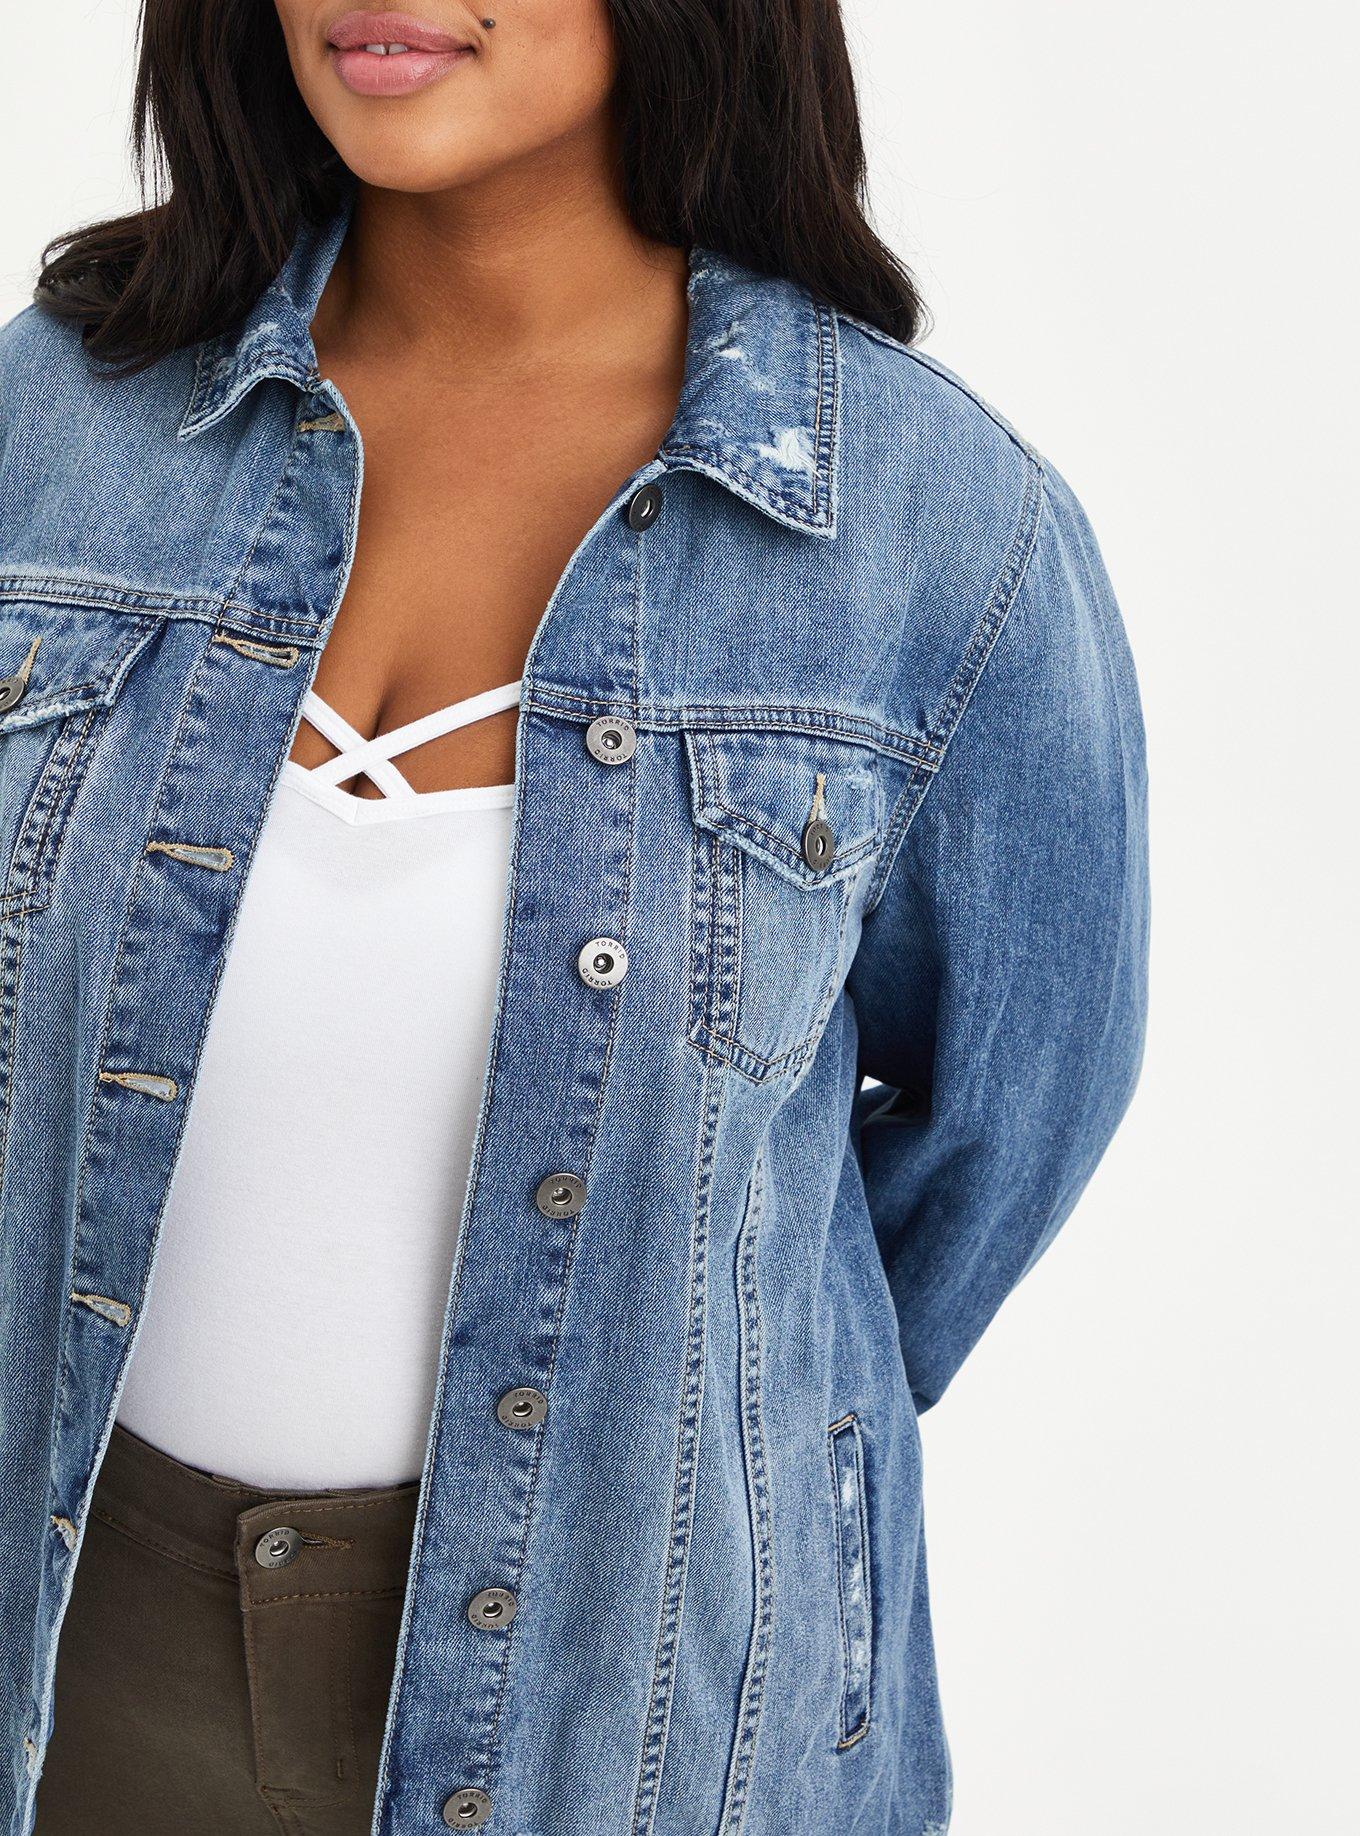 My Favorite 37 Hoodie Outfit Ideas 2020  Jacket outfit women, Oversized  denim jacket outfit, Denim jacket women